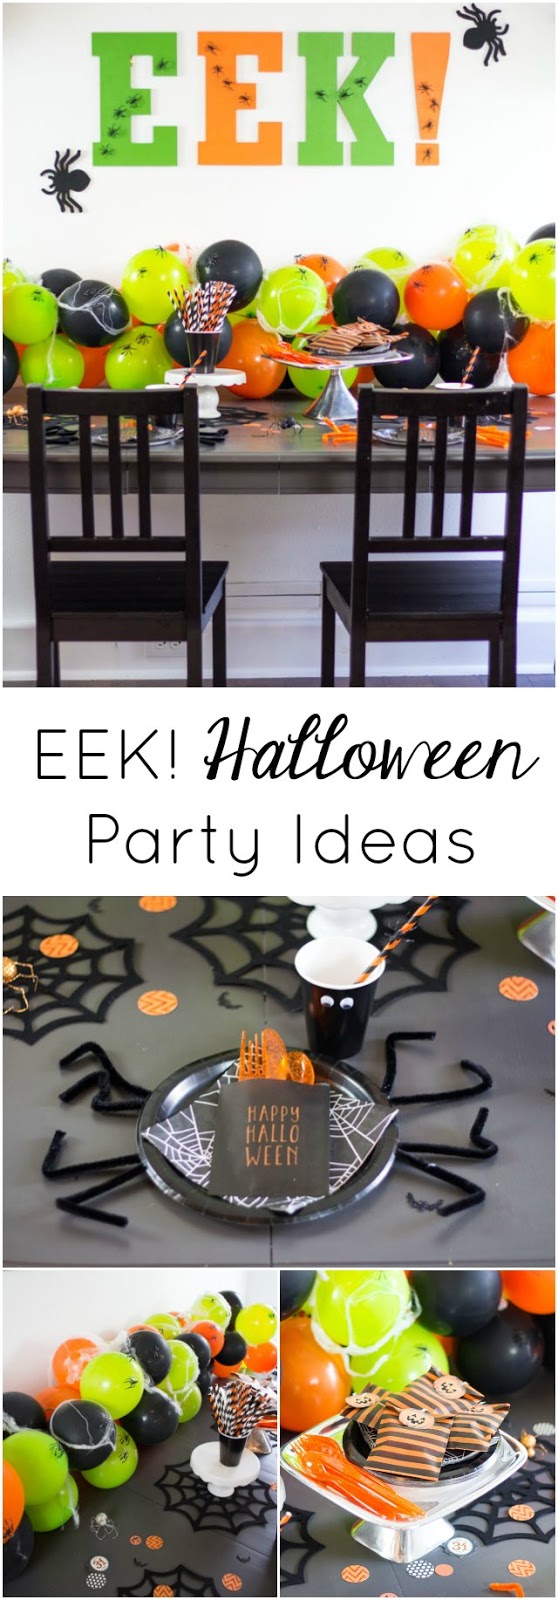 Simple ideas for hosting a creepy crawly spider-themed Halloween party!